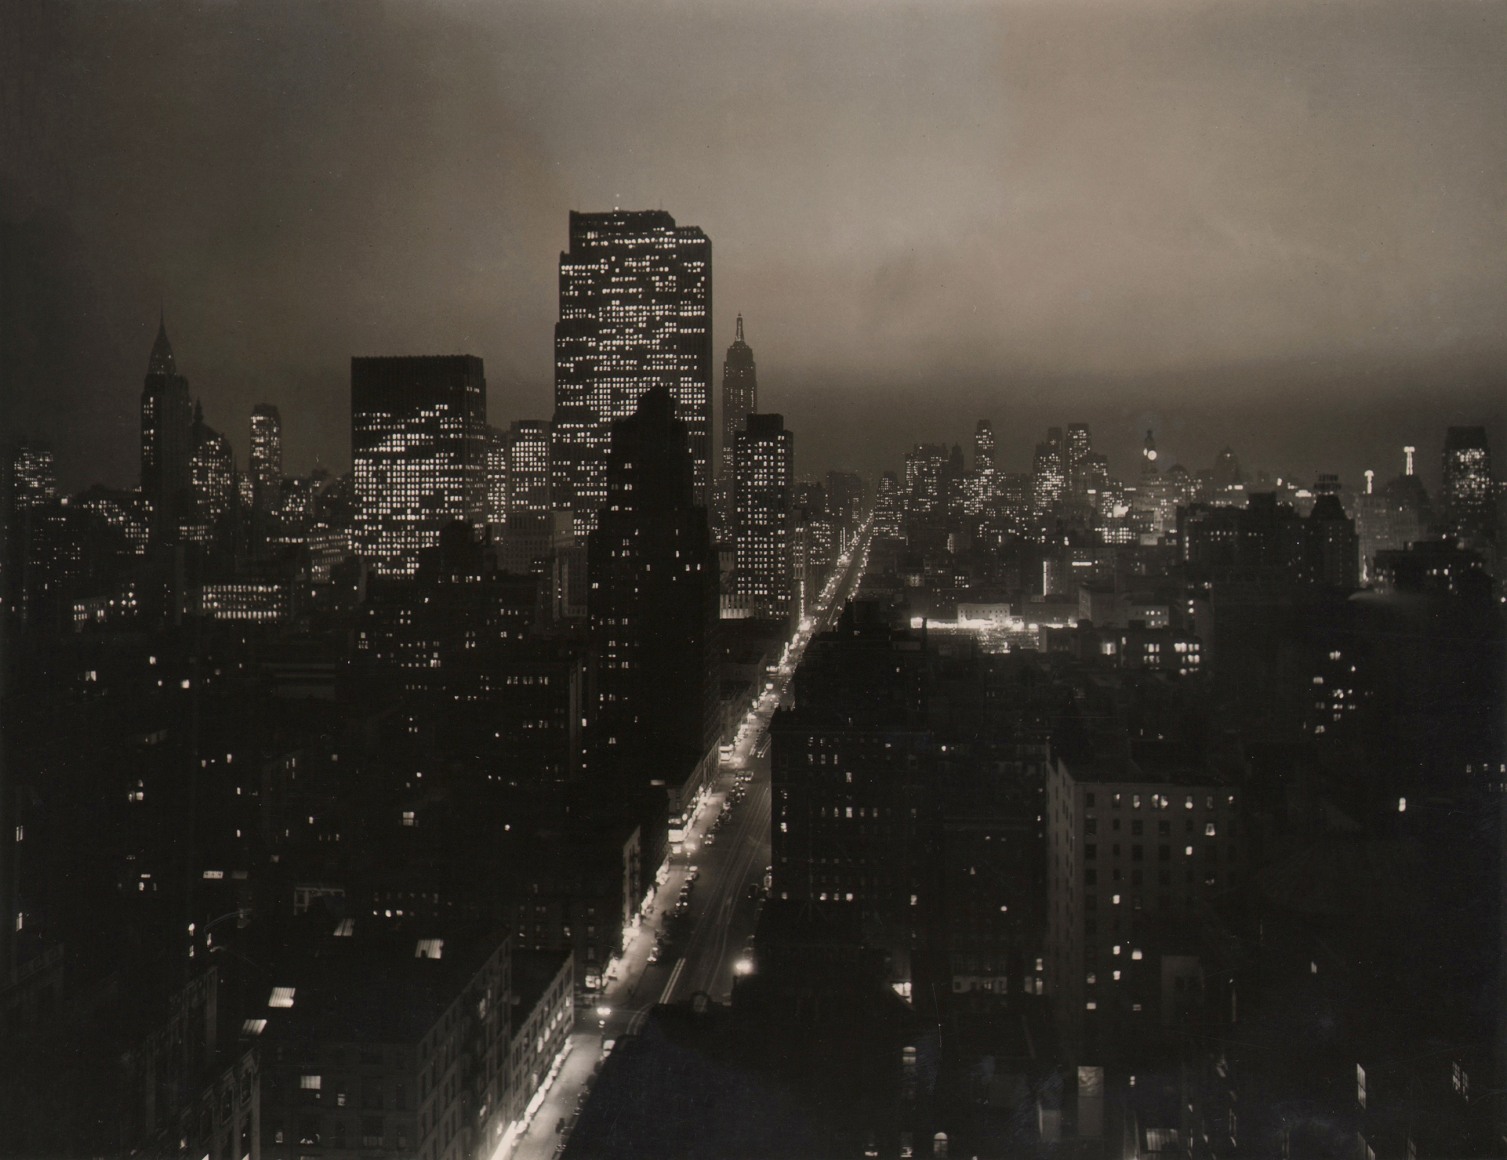 Paul J. Woolf, Sixth Avenue Looking South, ​c. 1935. Night time cityscape with an illuminated Sixth Avenue running diagonally up and right in the center of the frame.